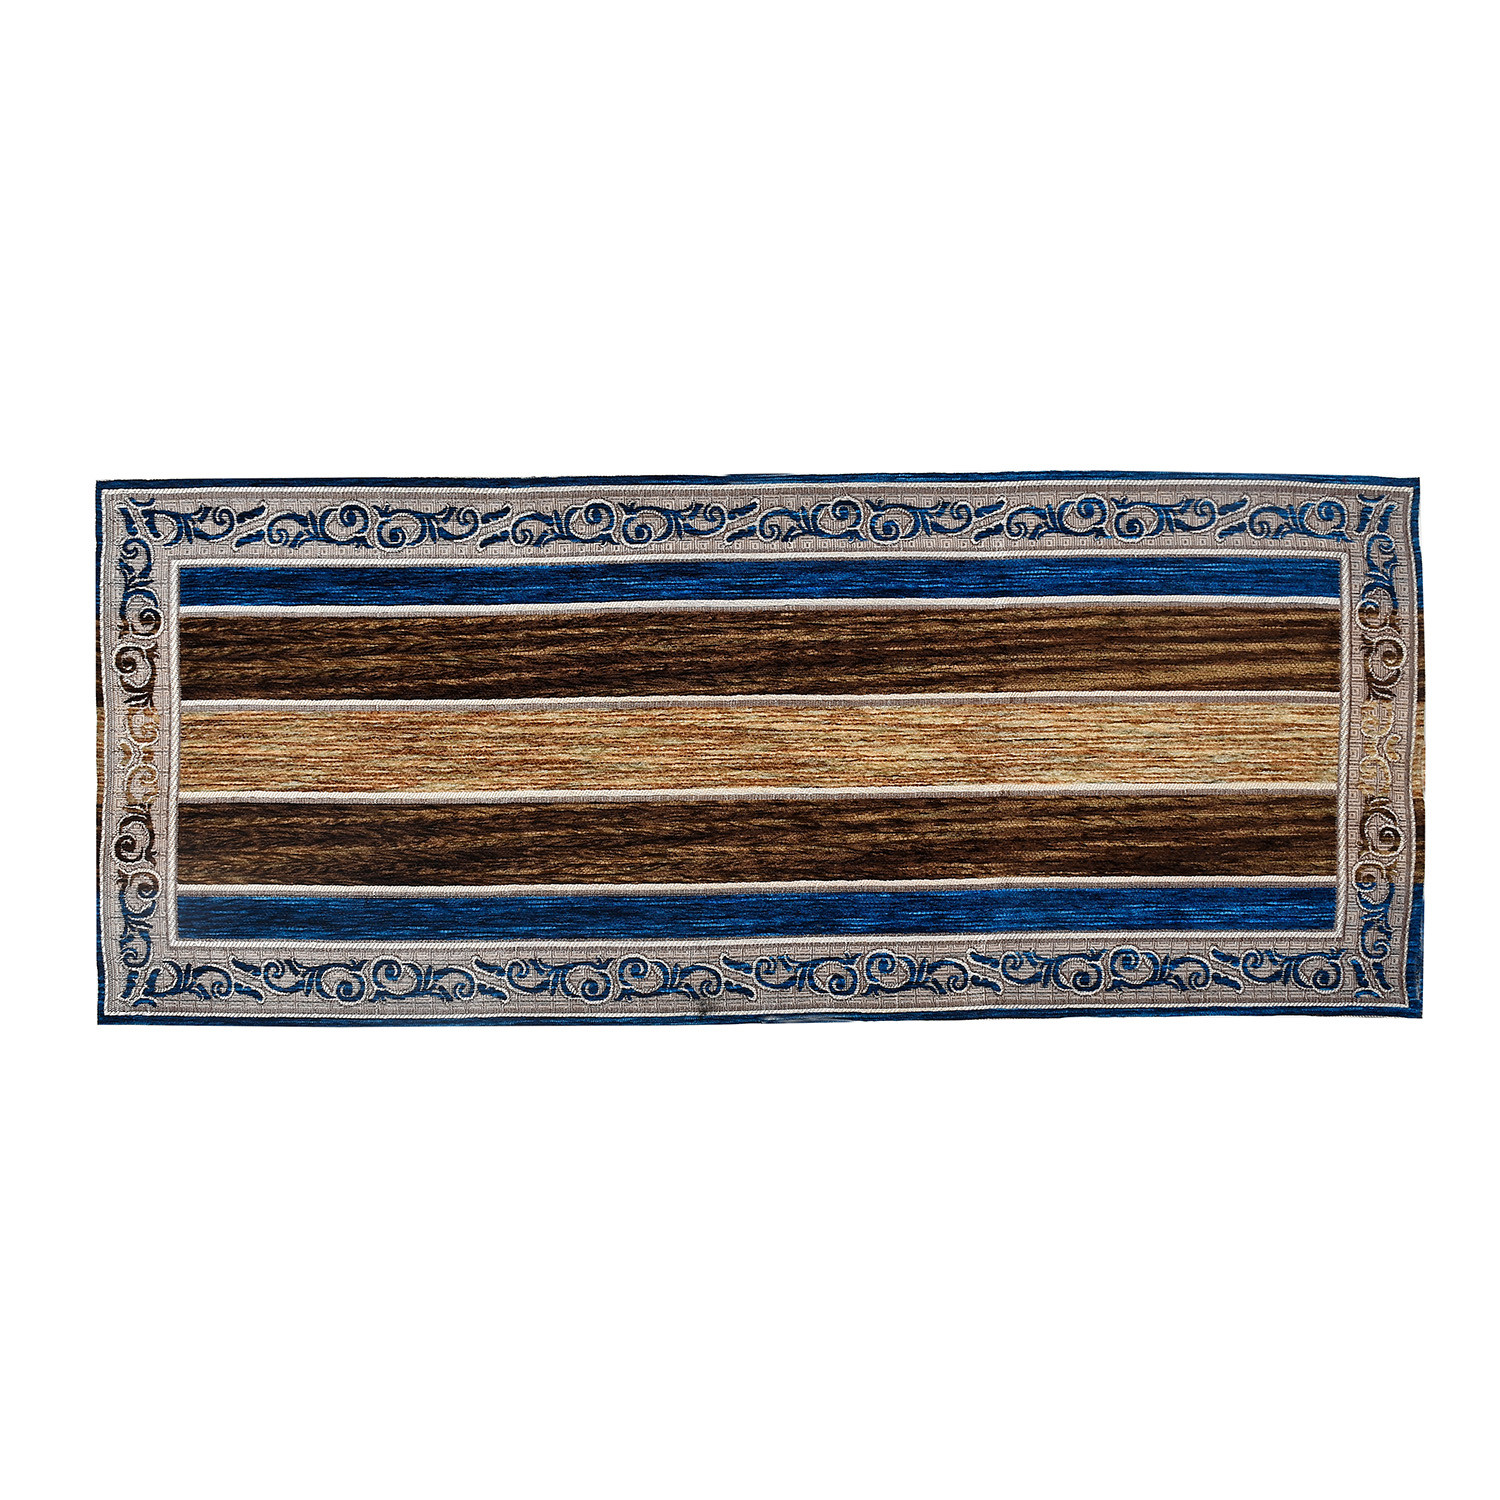 Kuber Industries Dining Table Runner Set|Rich Fabric Damask Pattern Table Mat|Multiclored Strips 6 Placemats for Restaurant & Home Decor,Set of 1 (Blue)